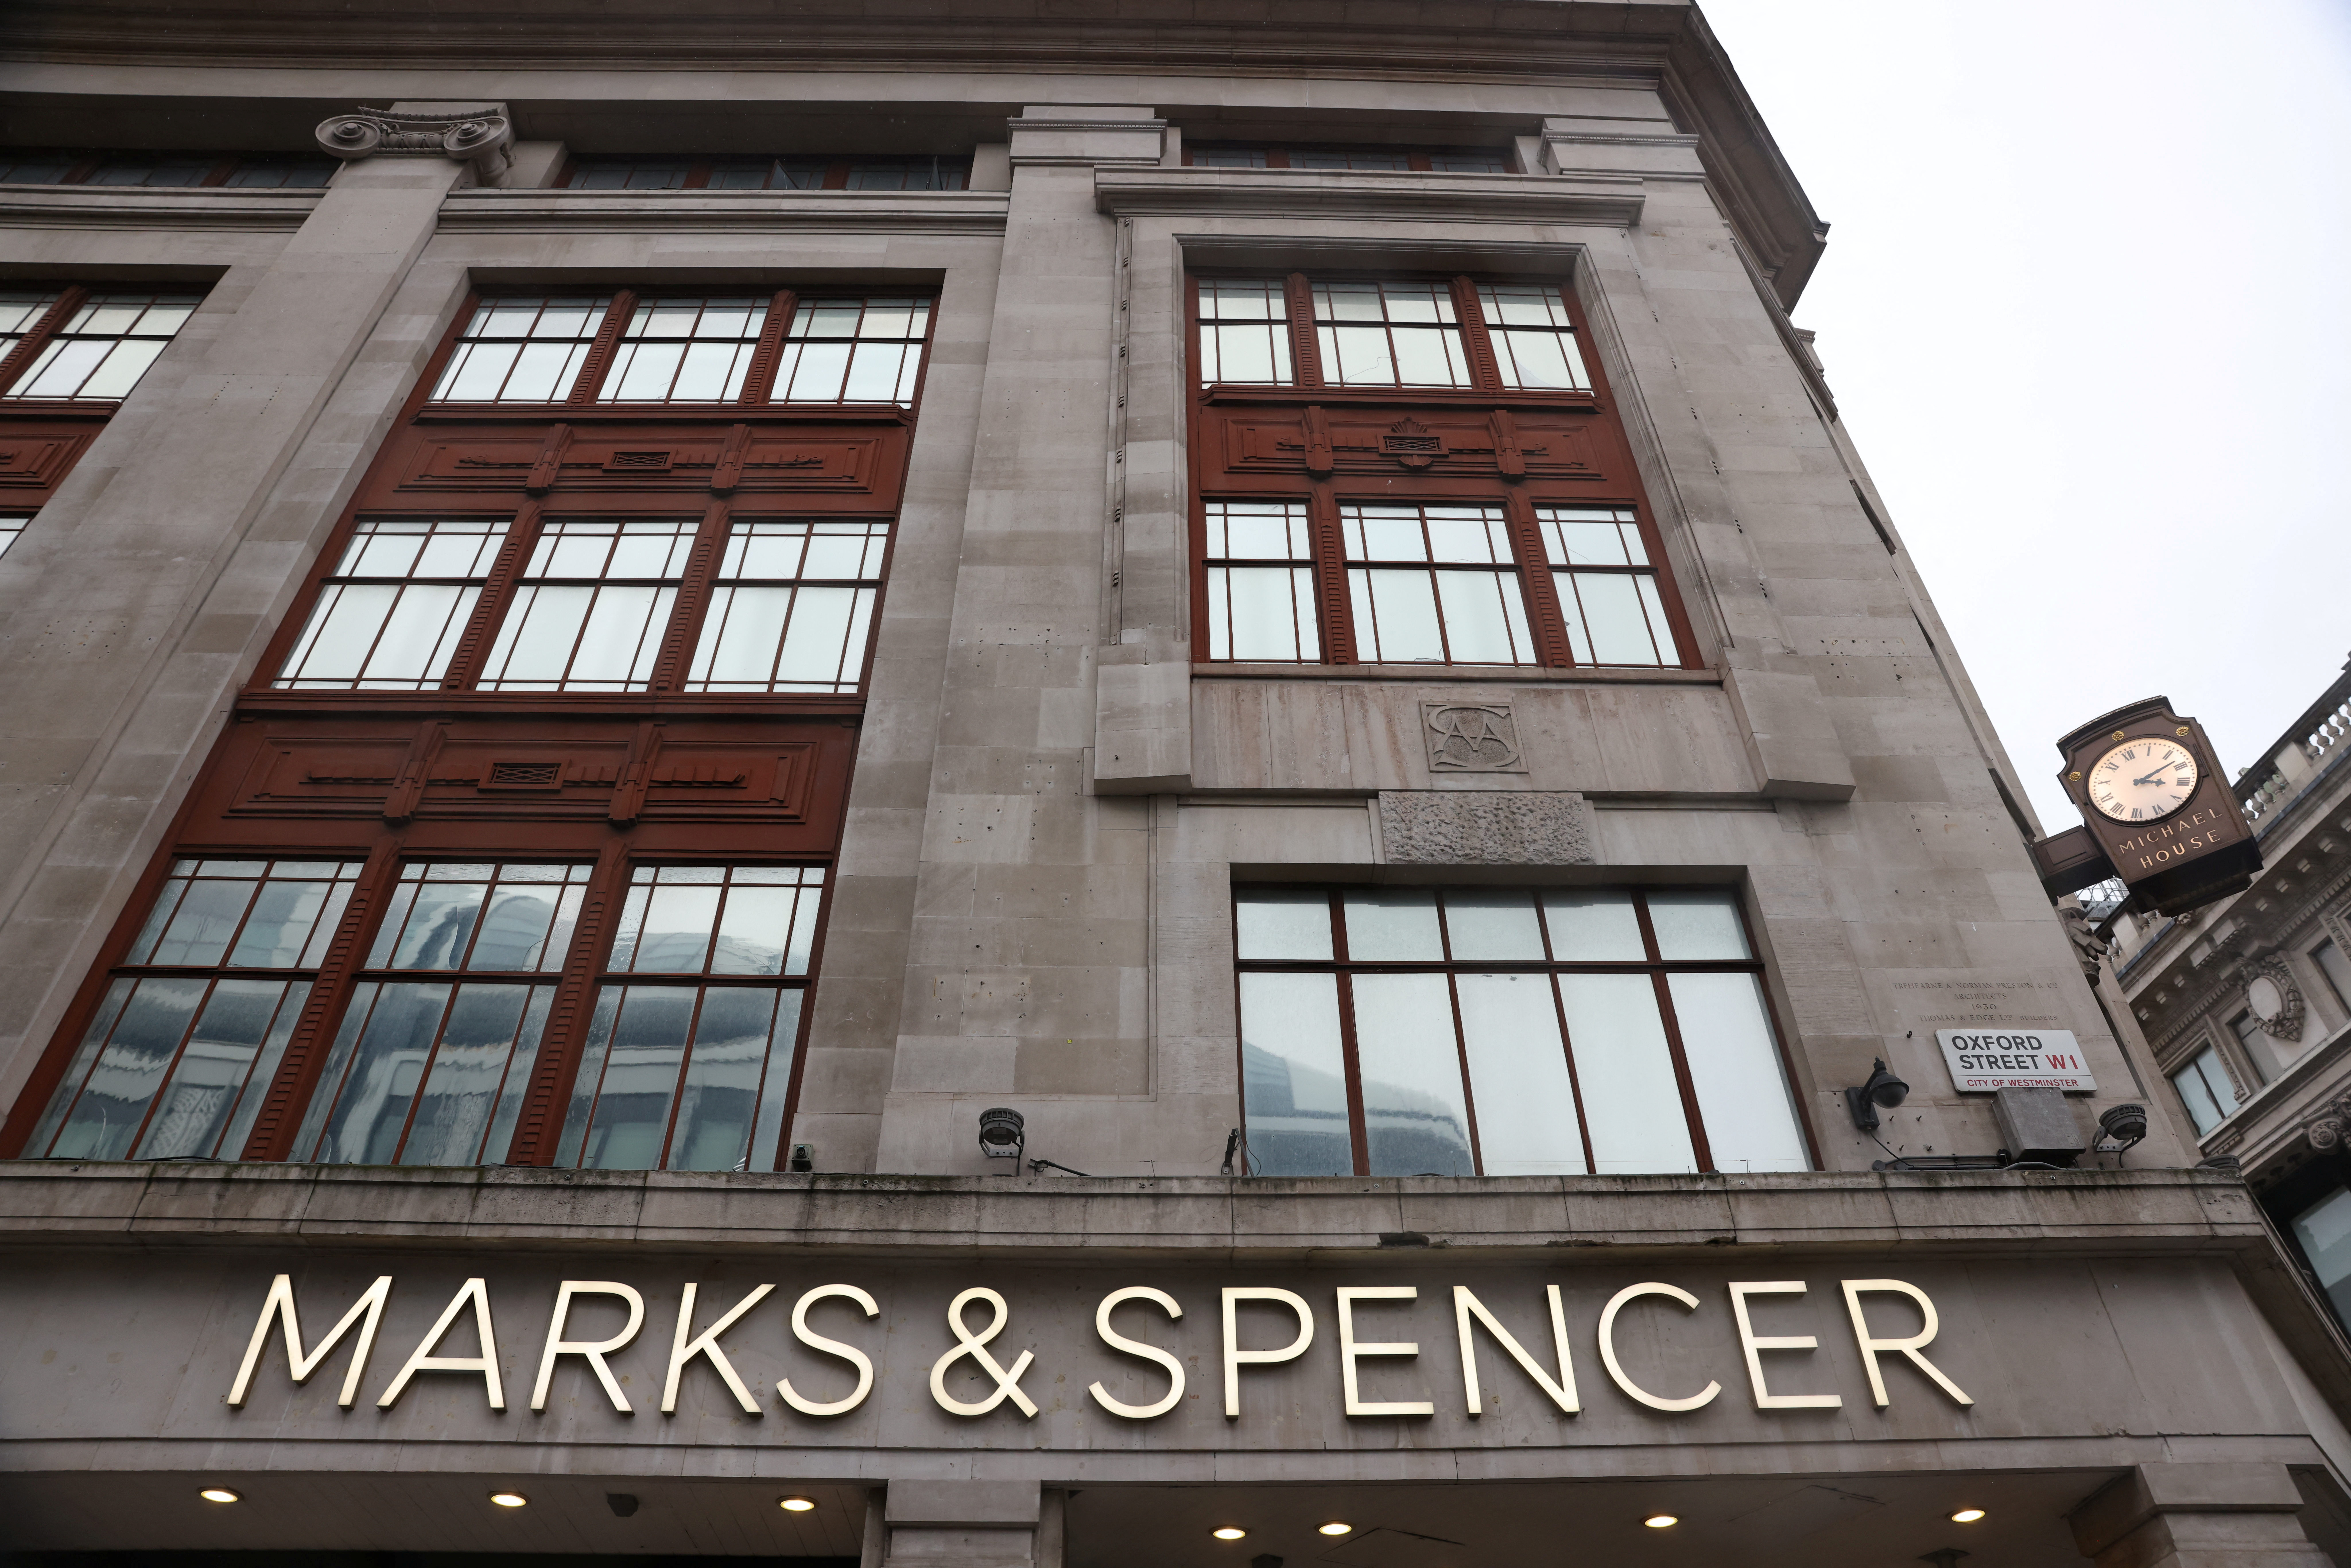 The Marks & Spencer logo is seen at a store near Marble Arch on Oxford Street, in London